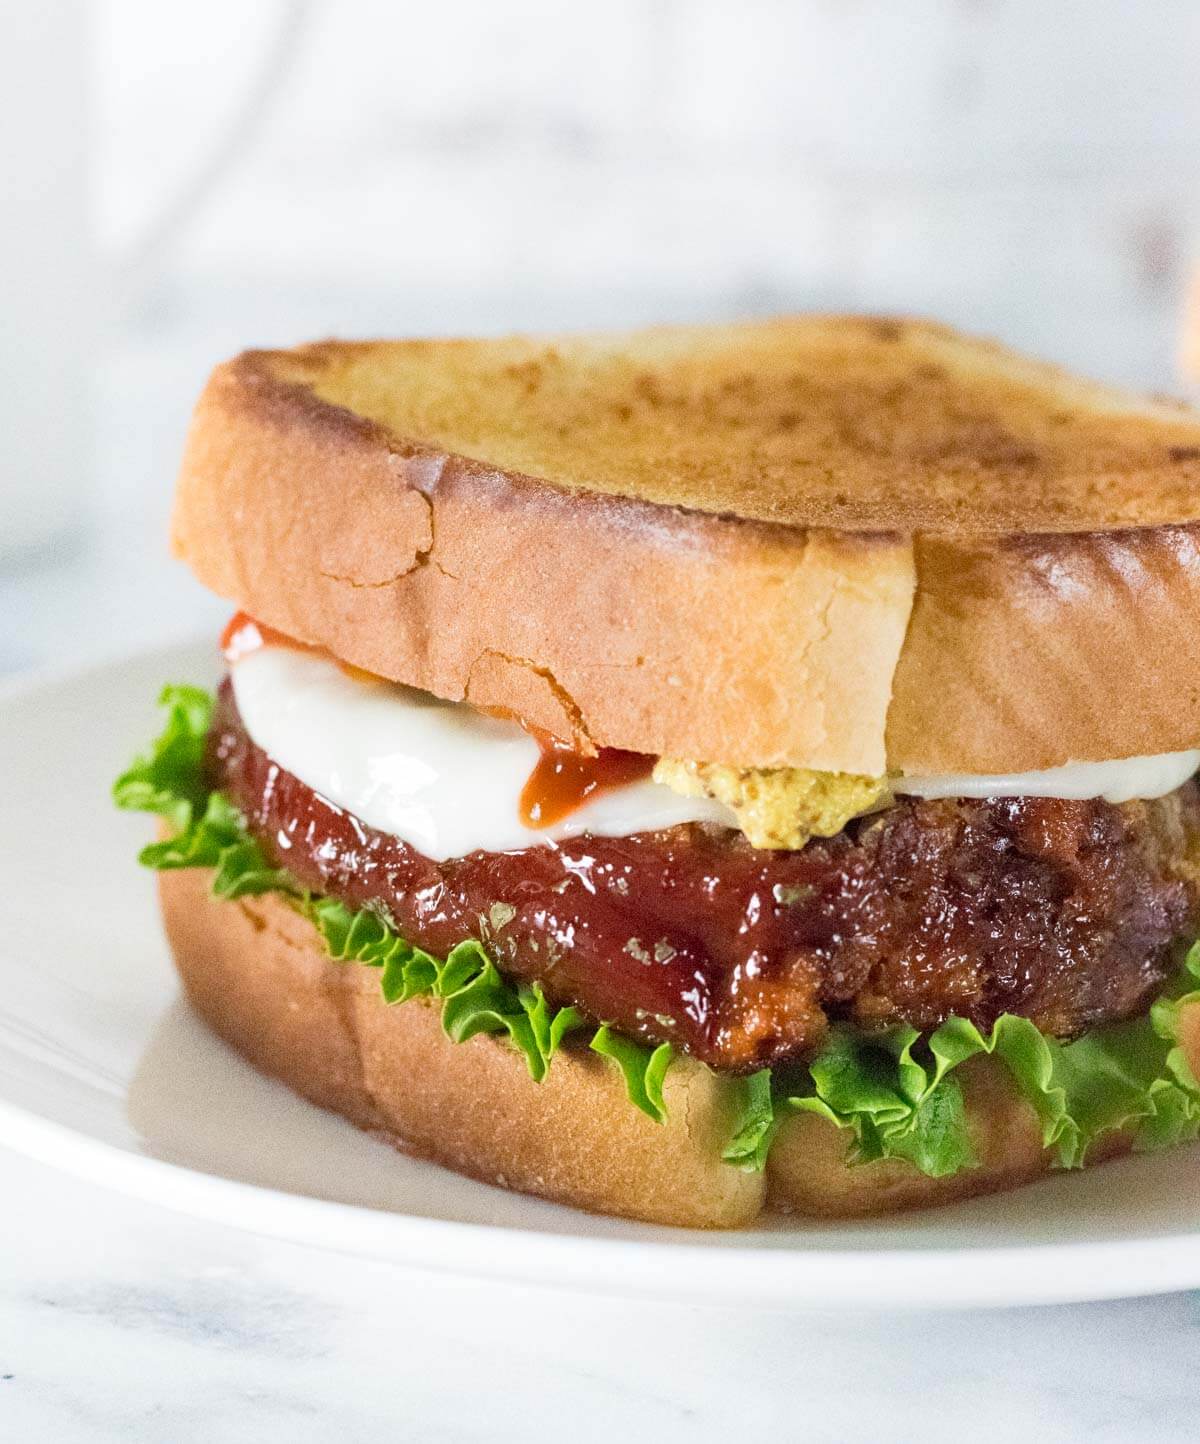 Meatloaf sandwich on Texas toast with ketchup, mustard, and lettuce.